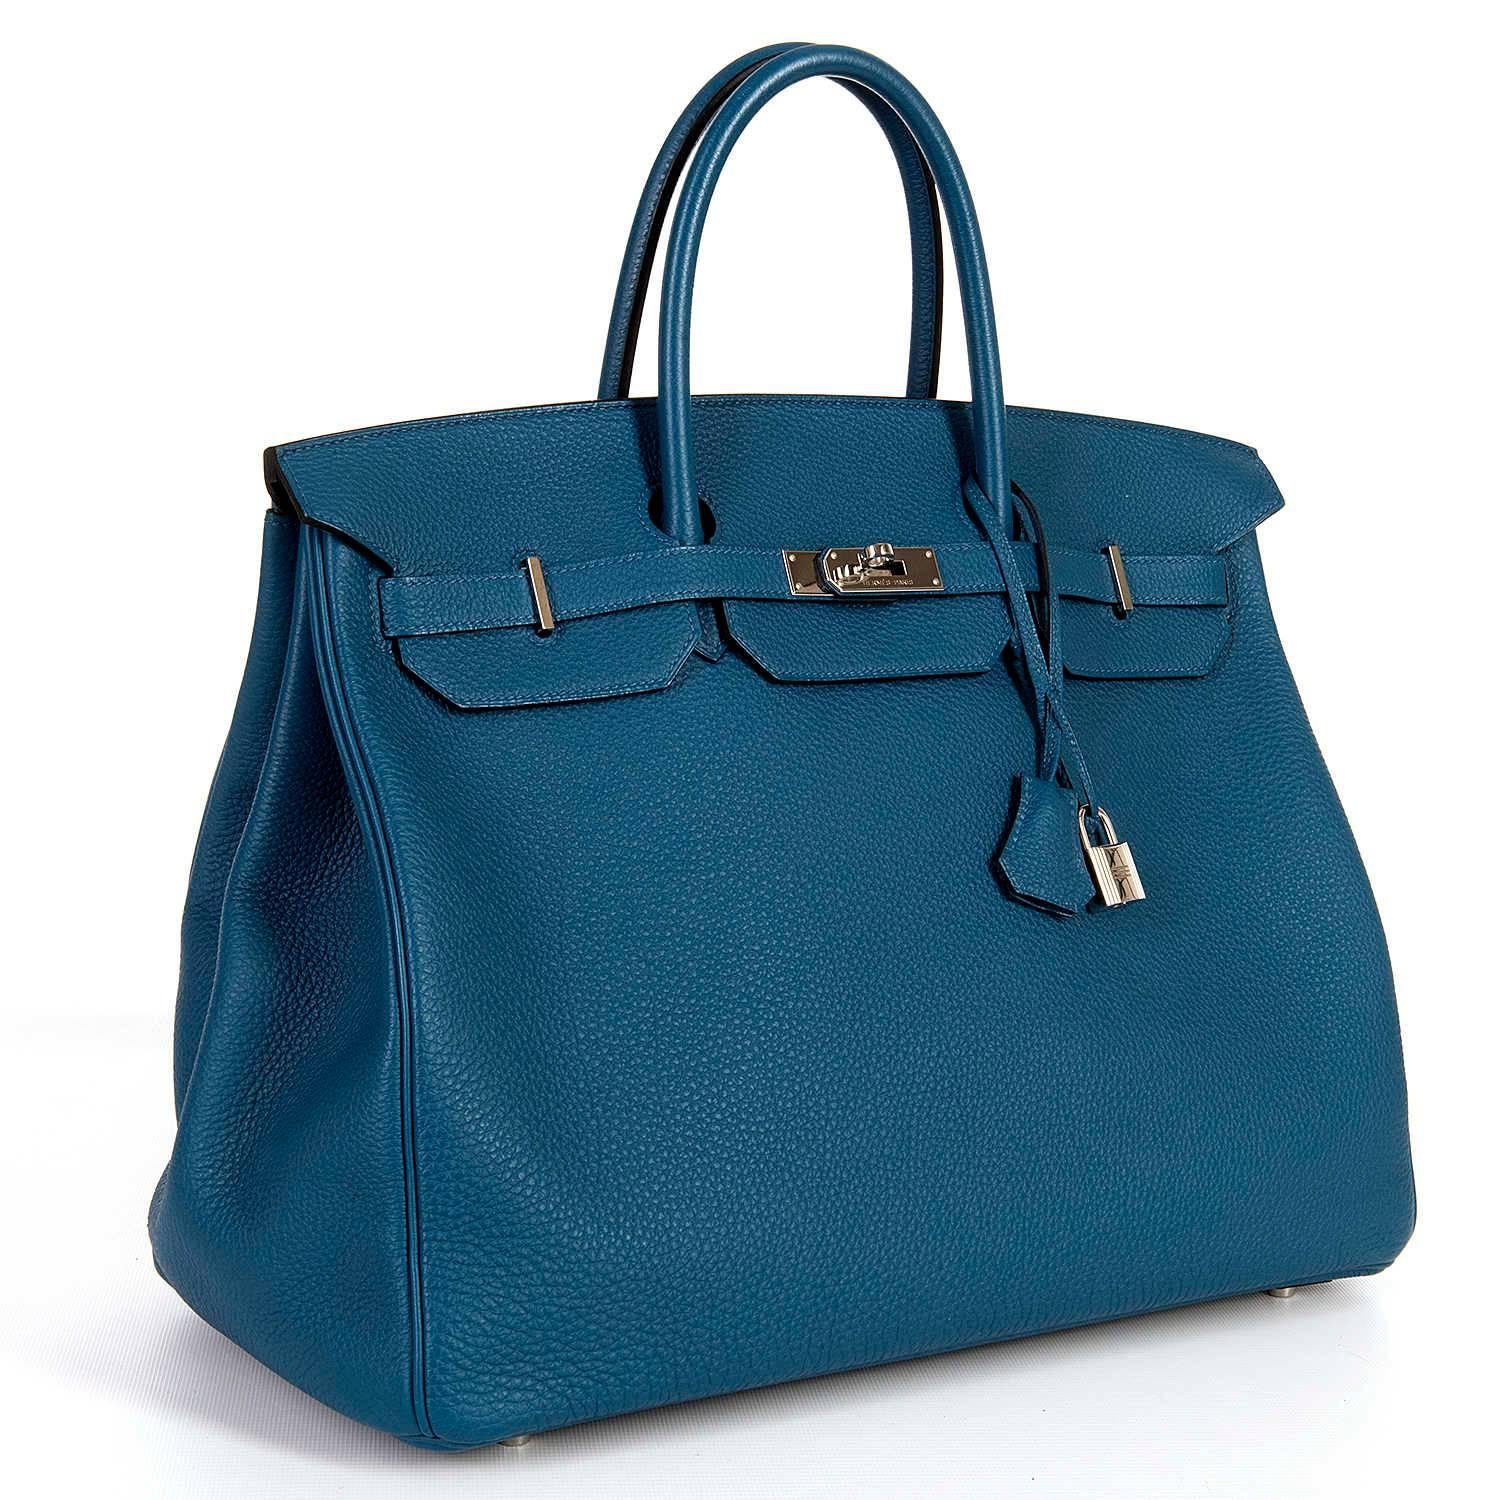 A Fabulous Hermes 40cm 'Birkin' bag in Cobalt Blue Togo Leather with Silver Palladium Hardware. In pristine, 'store-fresh' condition throughout, the bag is from Hermes 2013 collection and bears the makers stamp Q in a square. The bag comes with it's